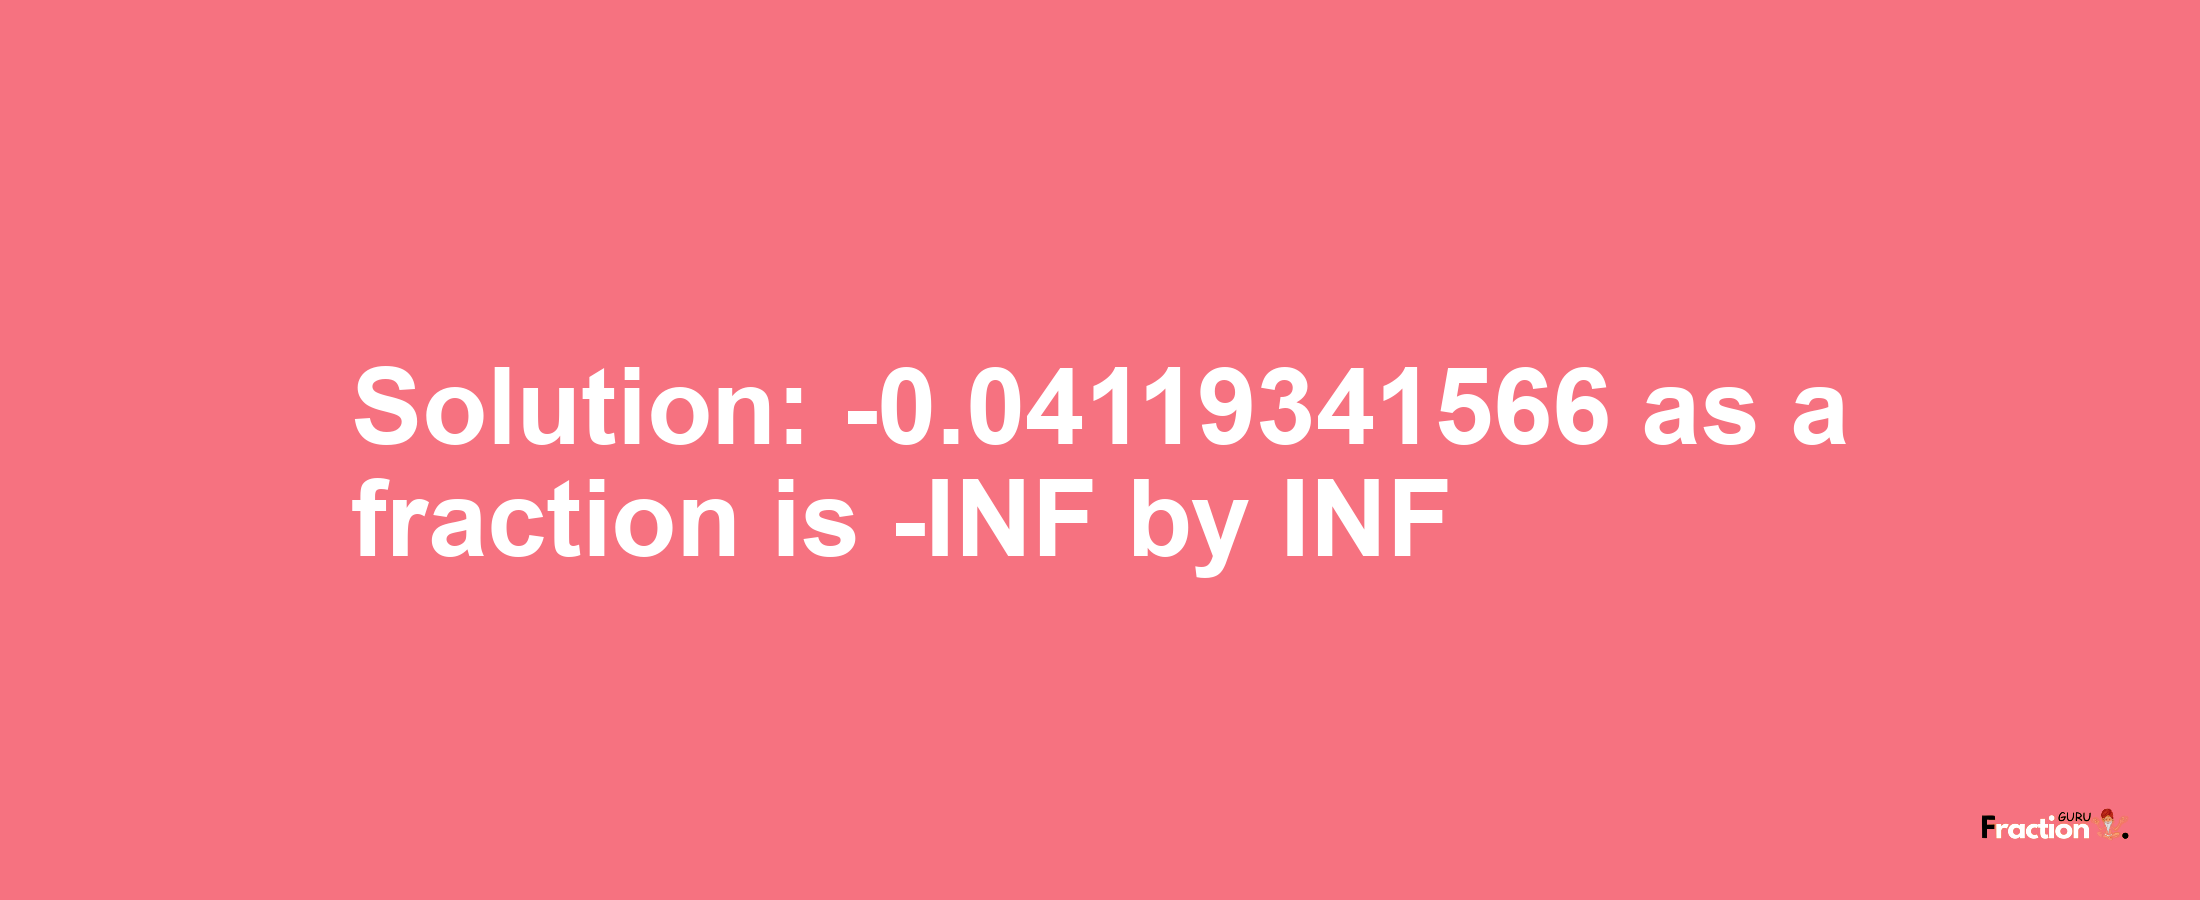 Solution:-0.04119341566 as a fraction is -INF/INF